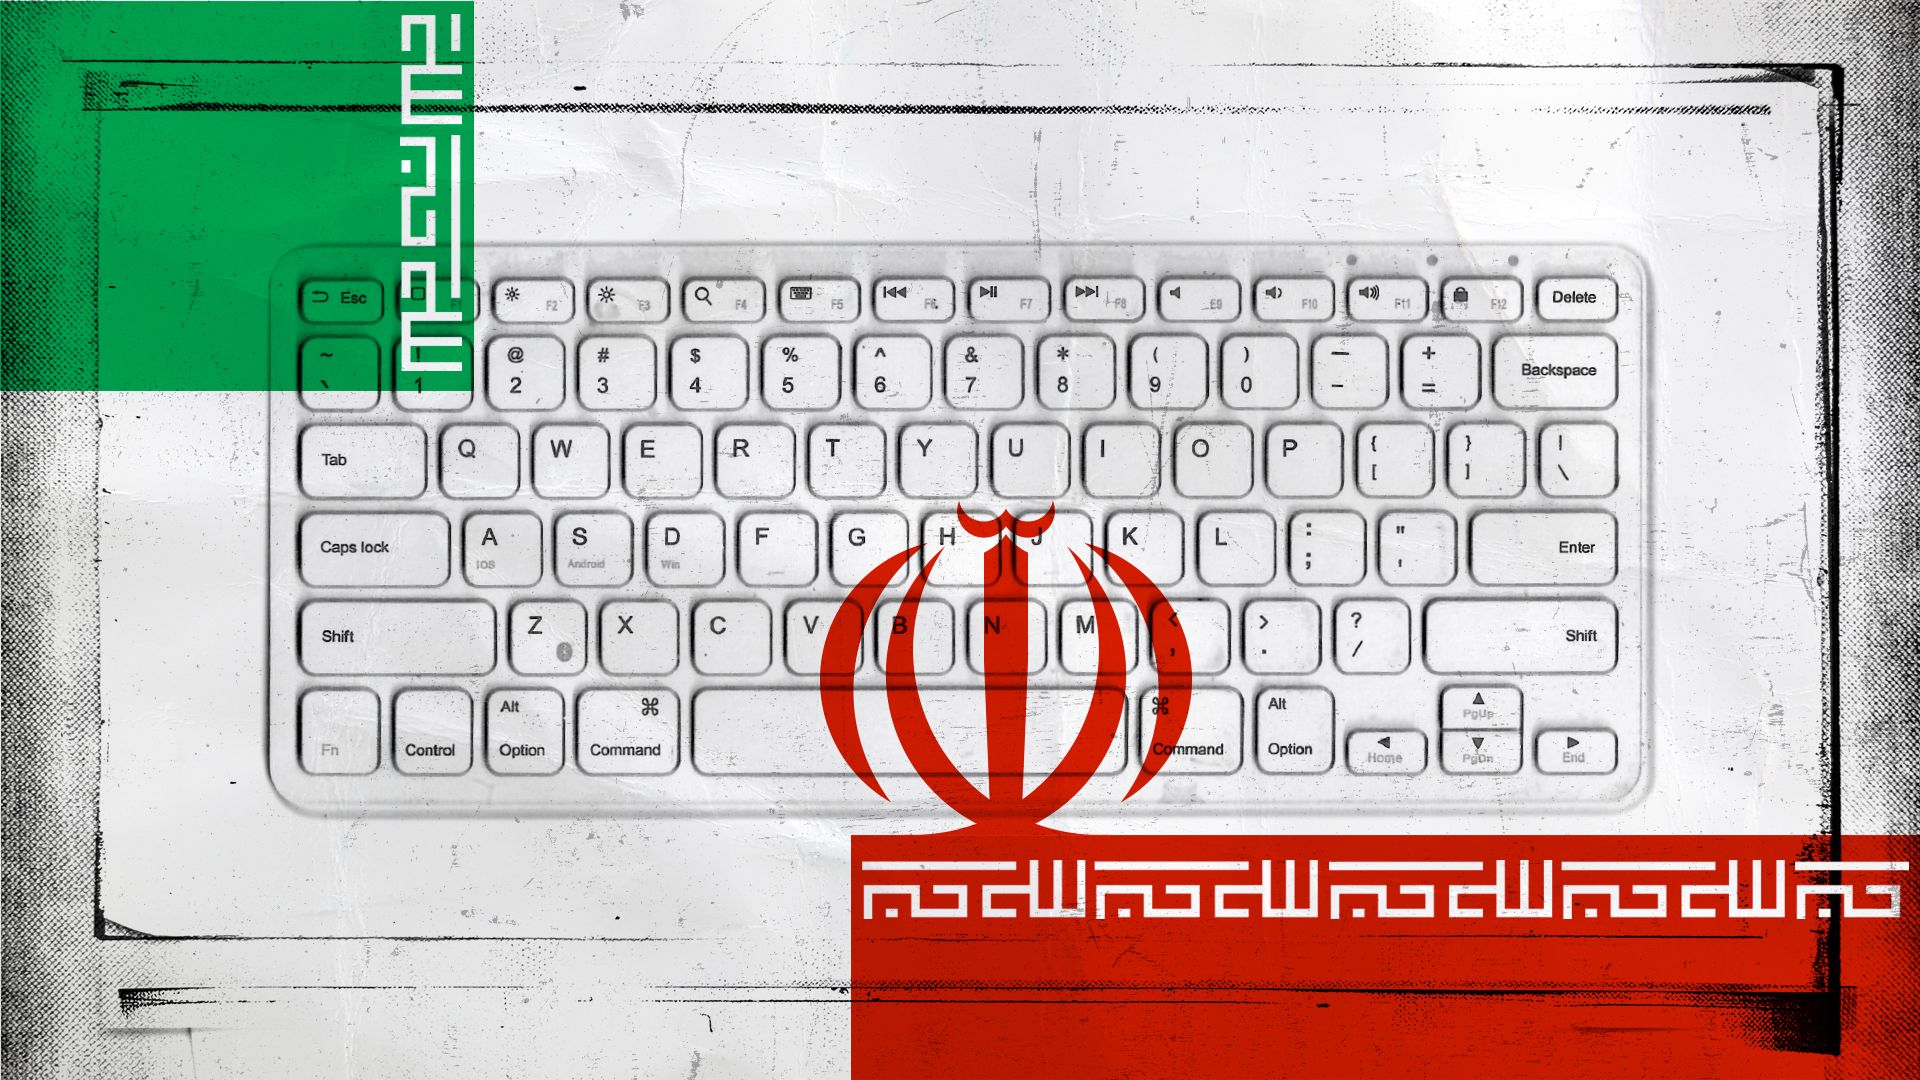 Illustration of a photocopied image of a keyboard with elements of the Iranian flag overlaid.